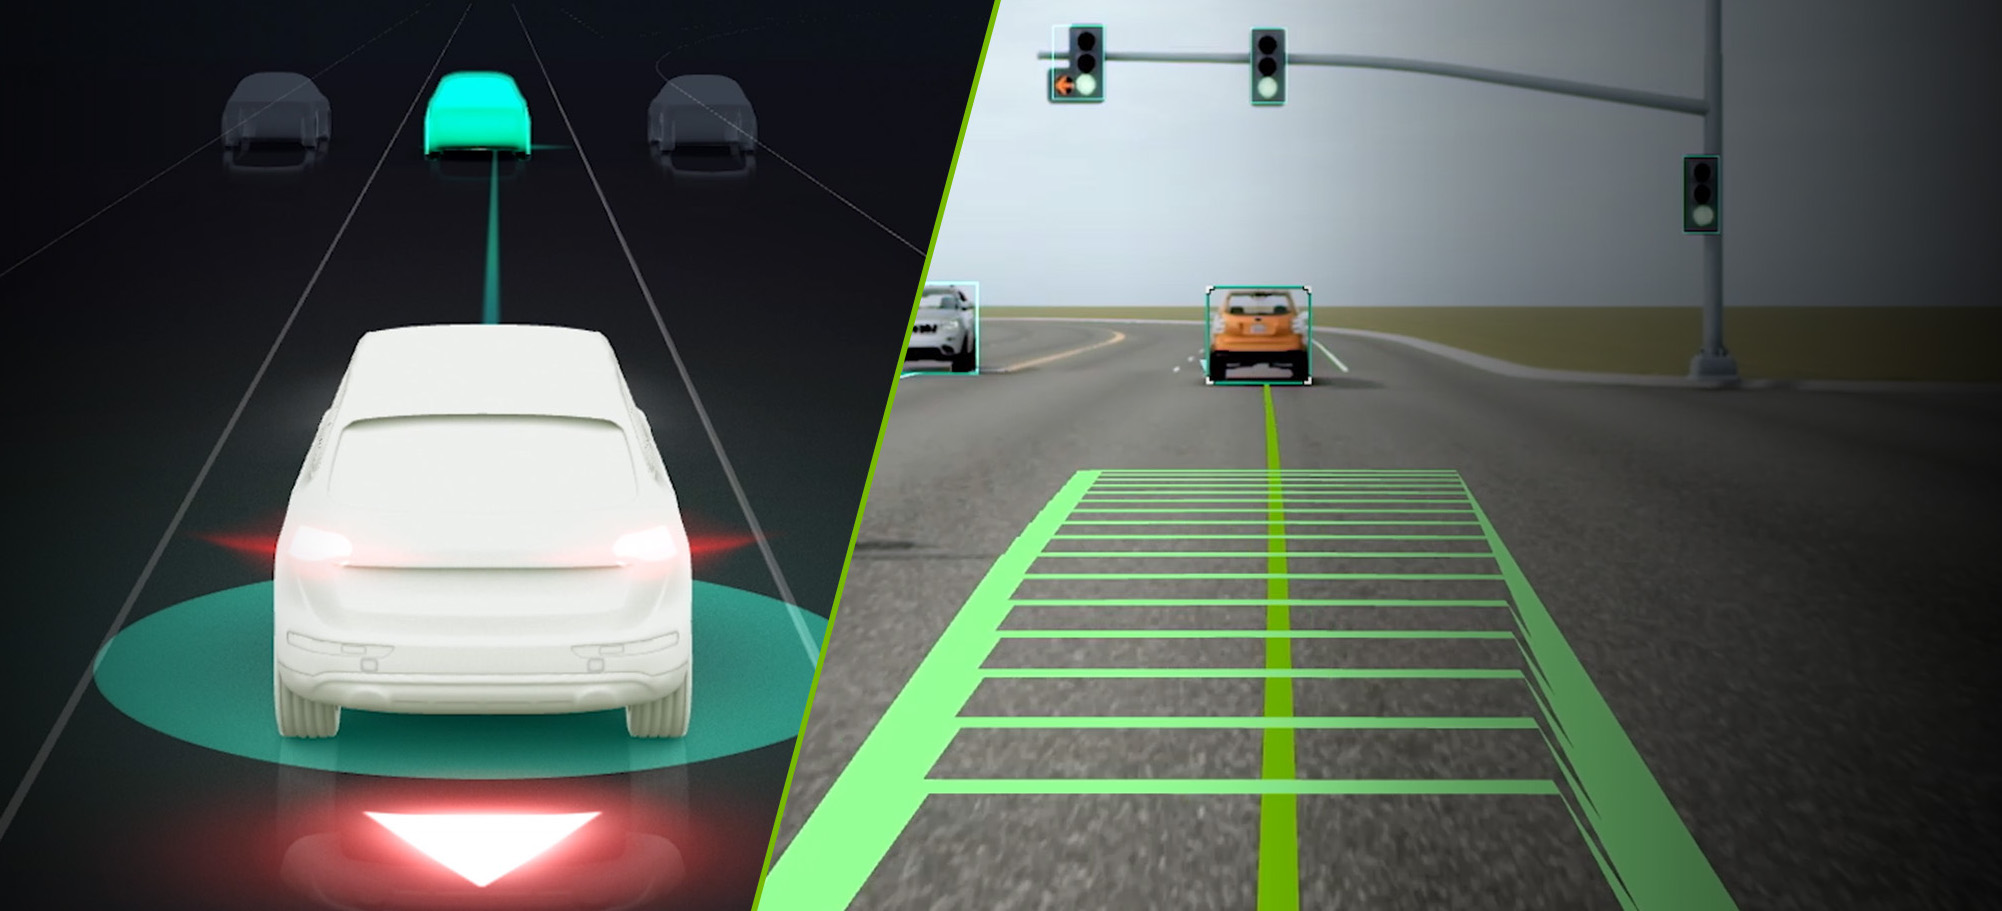 Mobileye CEO clowns on Nvidia for allegedly copying self-driving car safety scheme